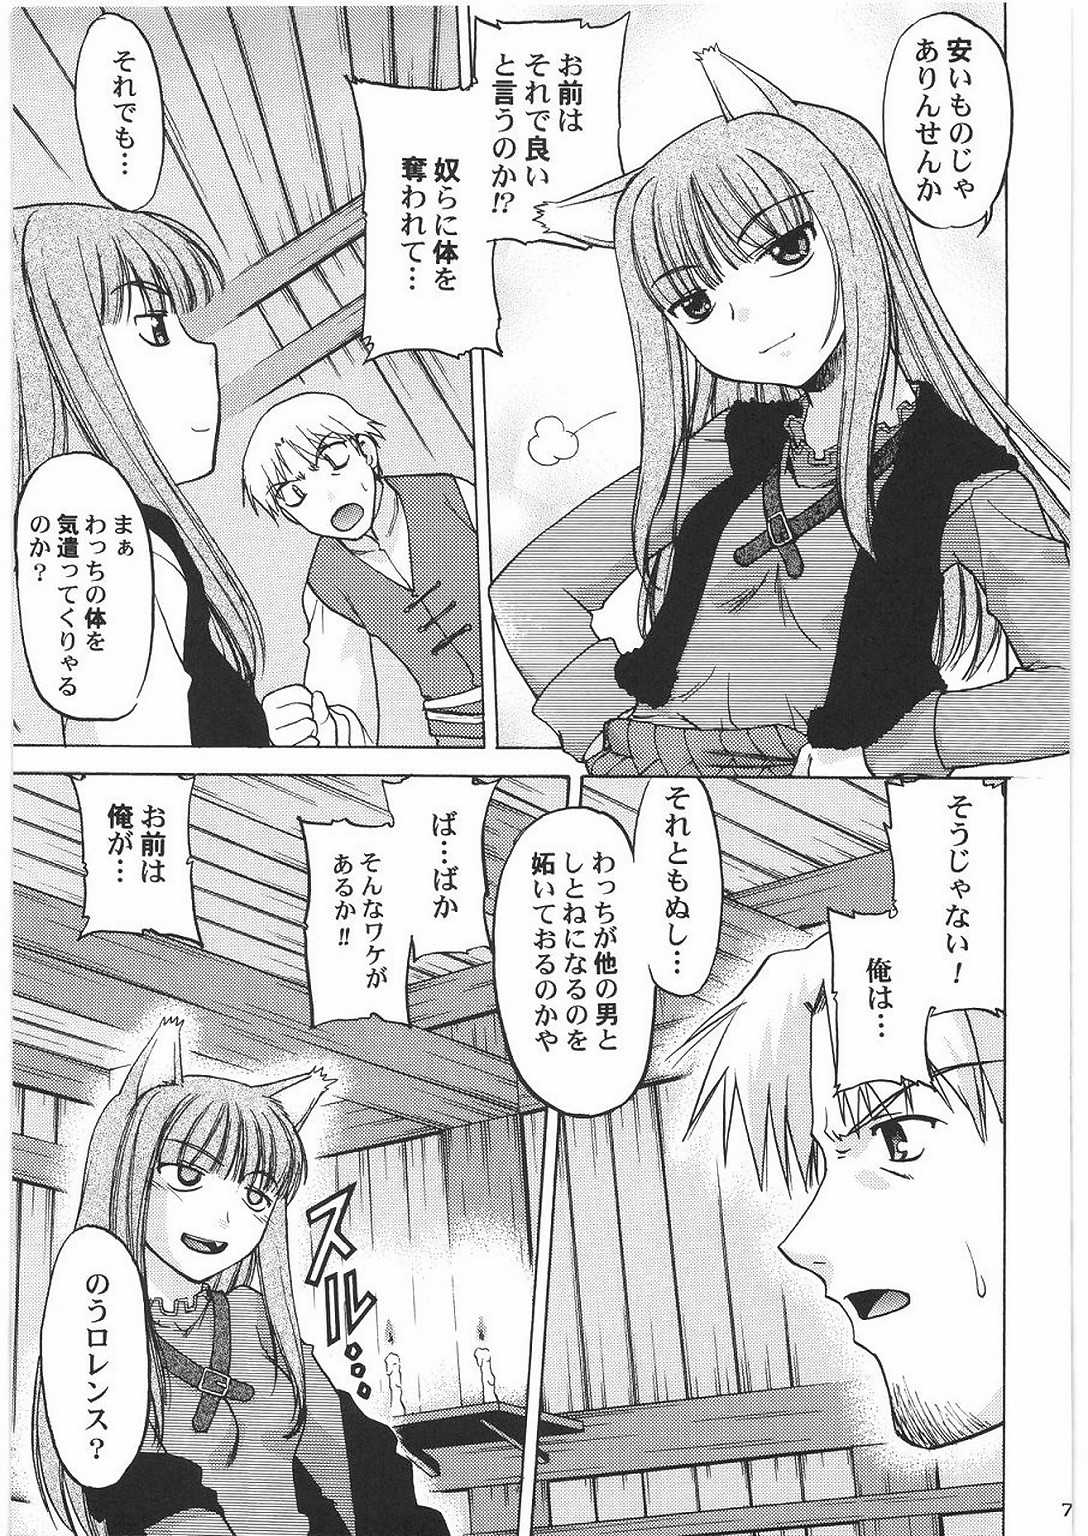 [Kacchuu Musume] Smalt Leather (Spice and Wolf) [甲冑娘] Smalt Leather (狼と香辛料)